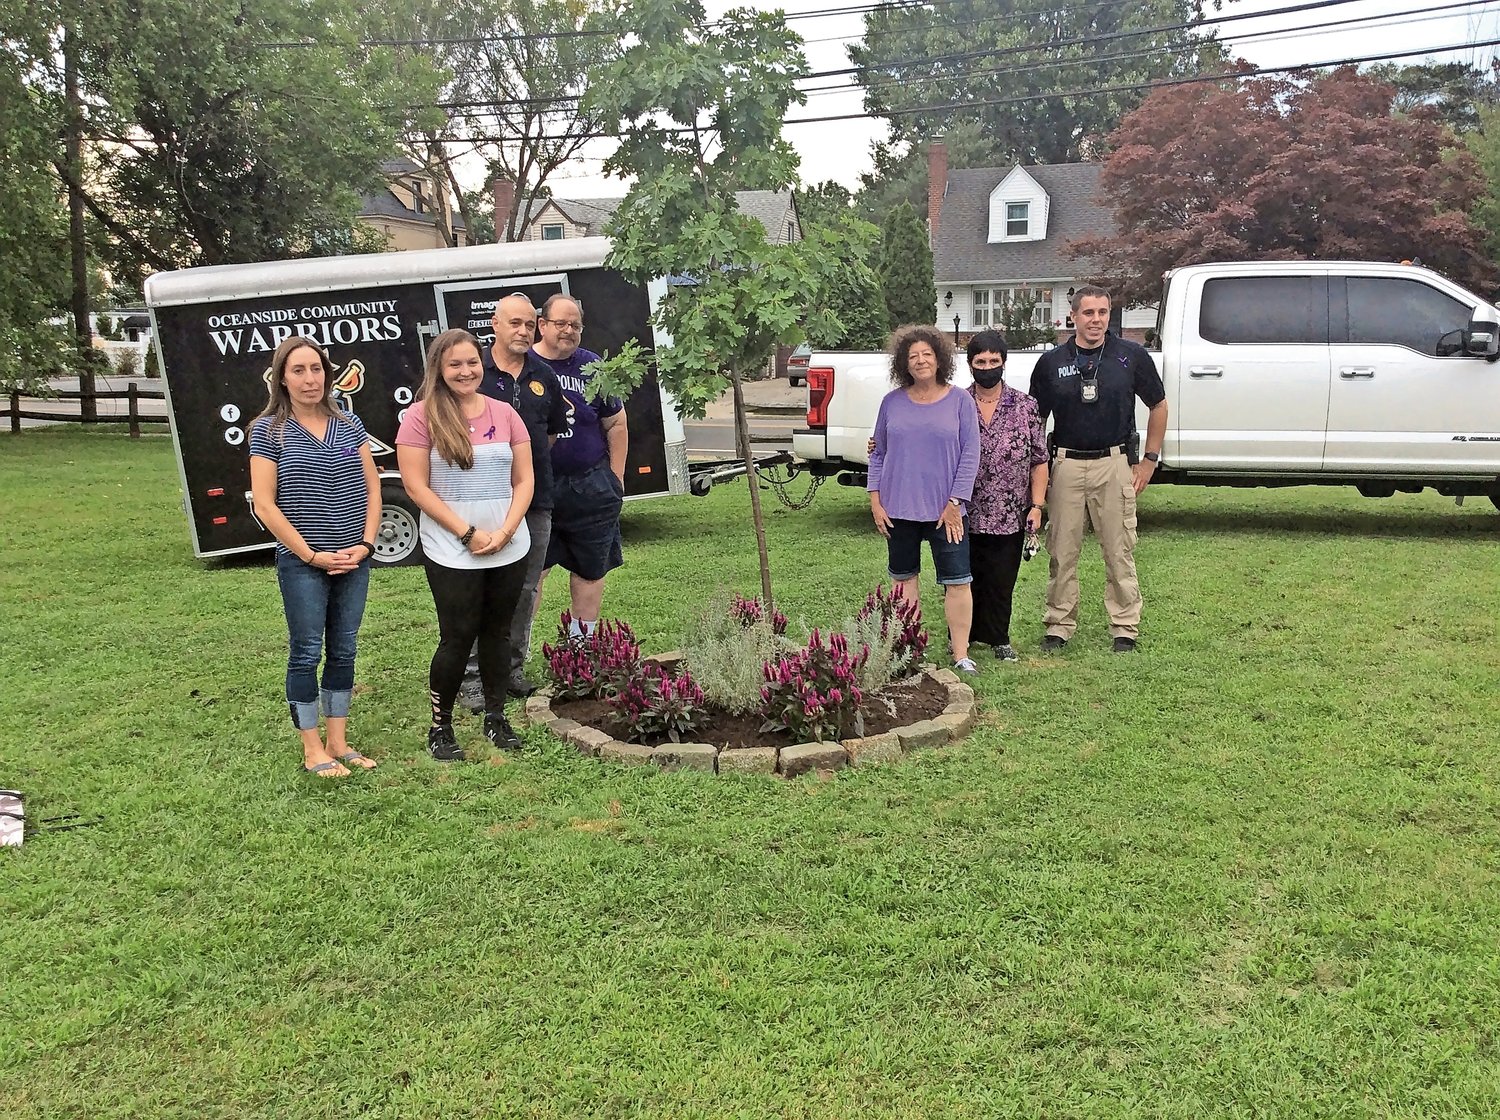 Members of the community gathered to join Oceanside Safe on International Overdose Awareness Day. Among the activities was a a candle-light vigil for those who have fallen victim to overdose and a Narcan training.